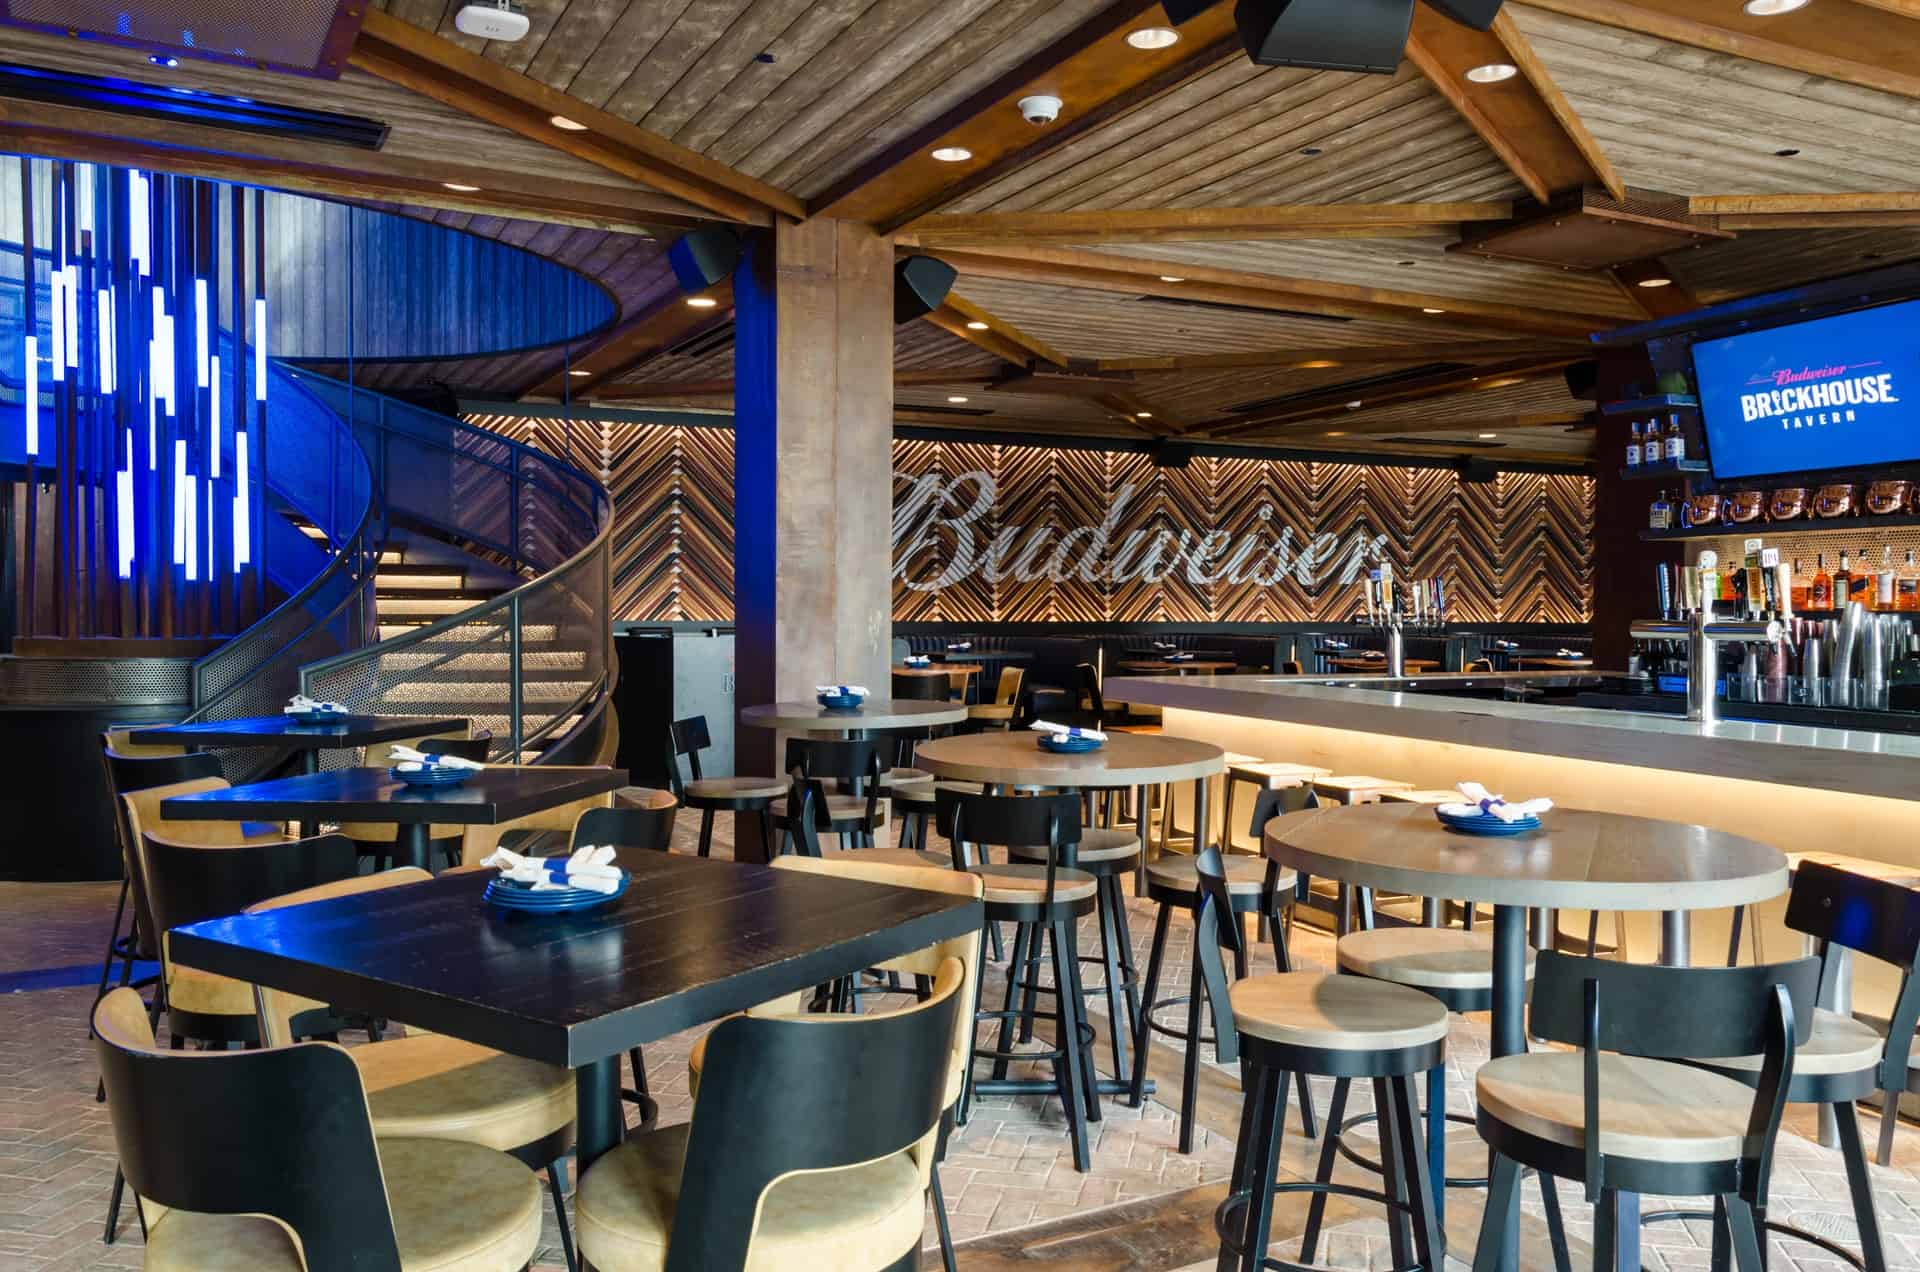 Budweiser Brickhouse Tavern in Lakeview Happy Hour - Happy Hour Revolution